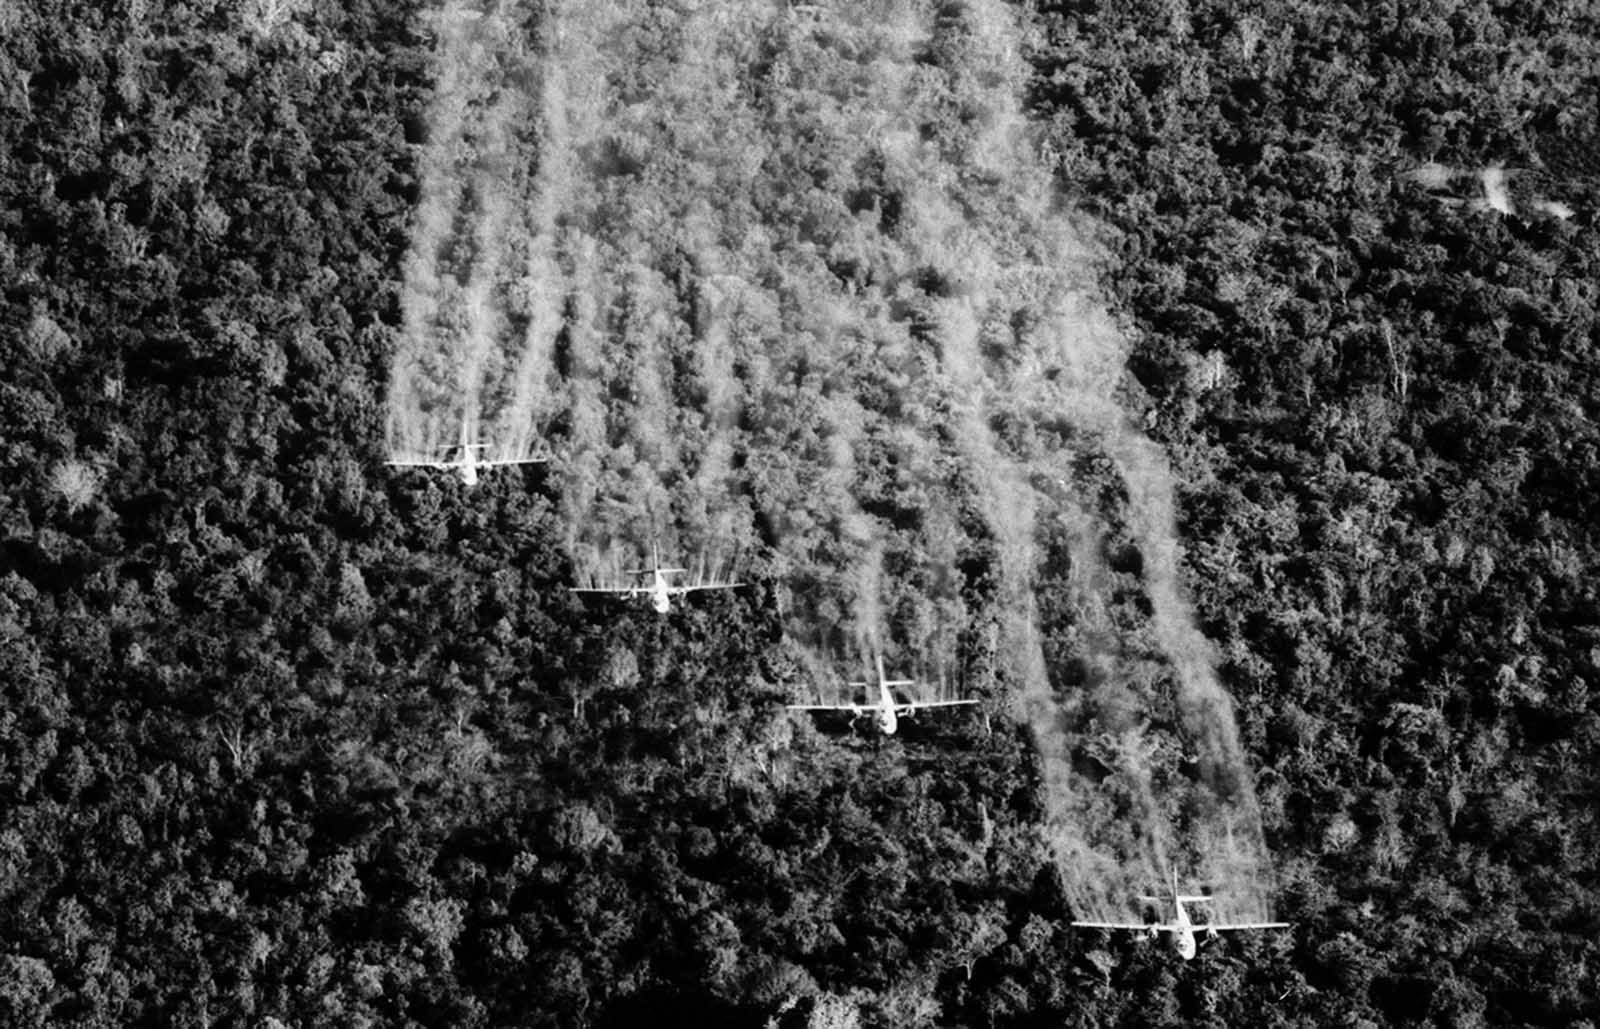 Four “Ranch Hand” C-123 aircraft spray liquid defoliant on a suspected Viet Cong position in South Vietnam in September of 1965. The four specially equipped planes covered a 1,000-foot-wide swath in each pass over the dense vegetation.